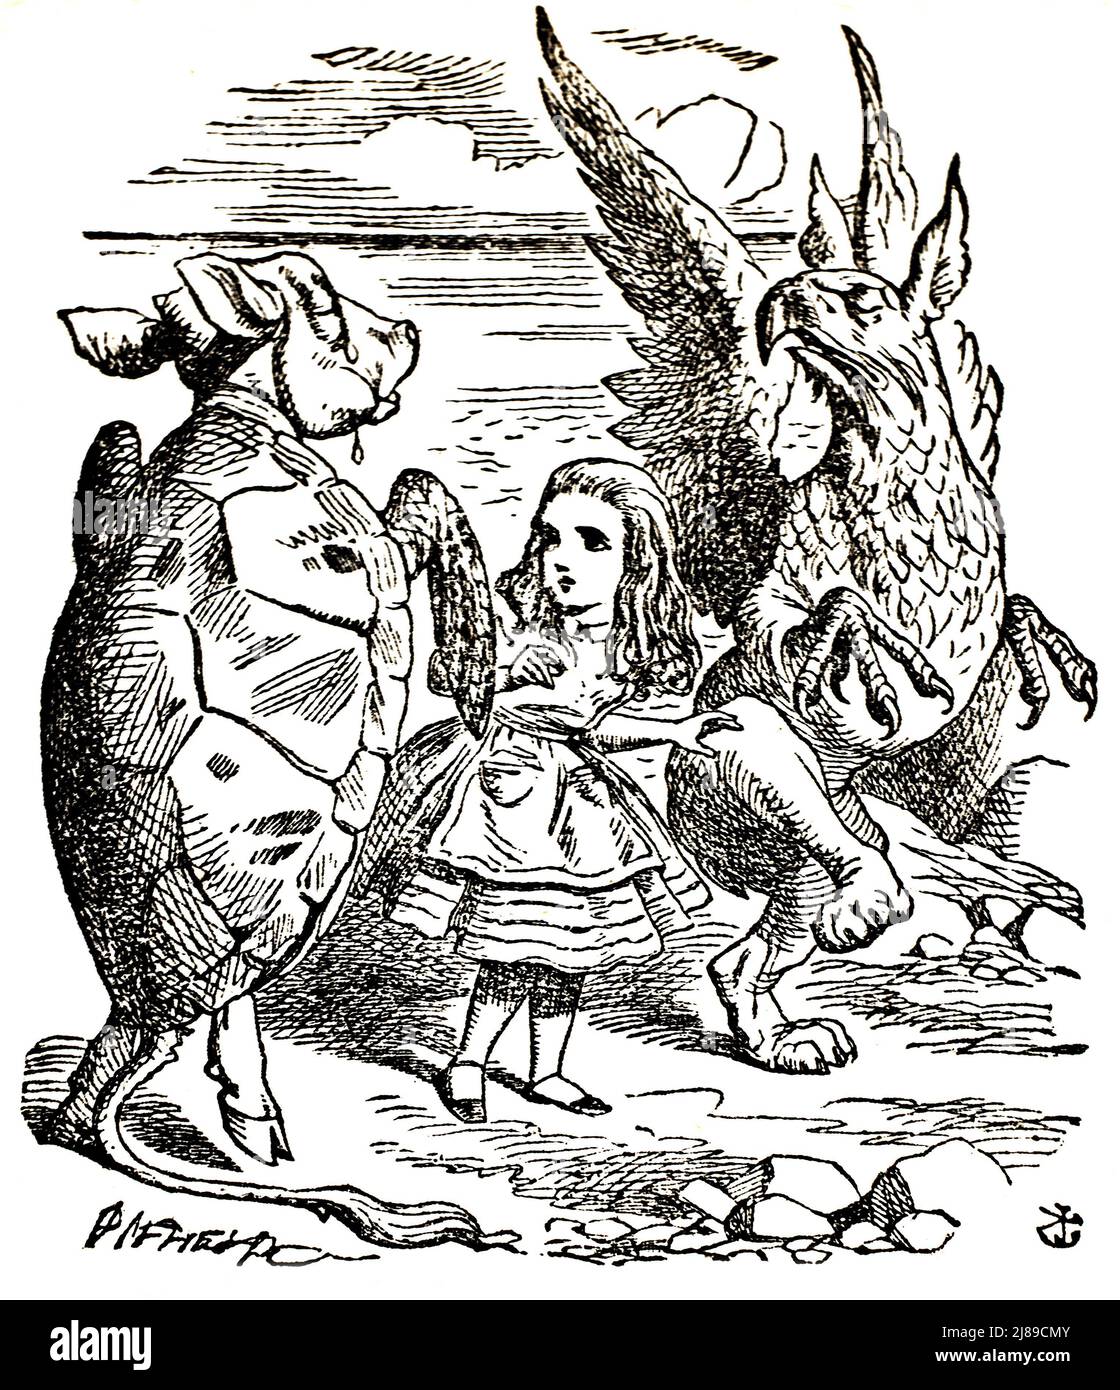 John Tenniel illustration of the Lobster Quadrille with the Mock Turtle from Alice in Wonderland by Lewis Carroll Stock Photo